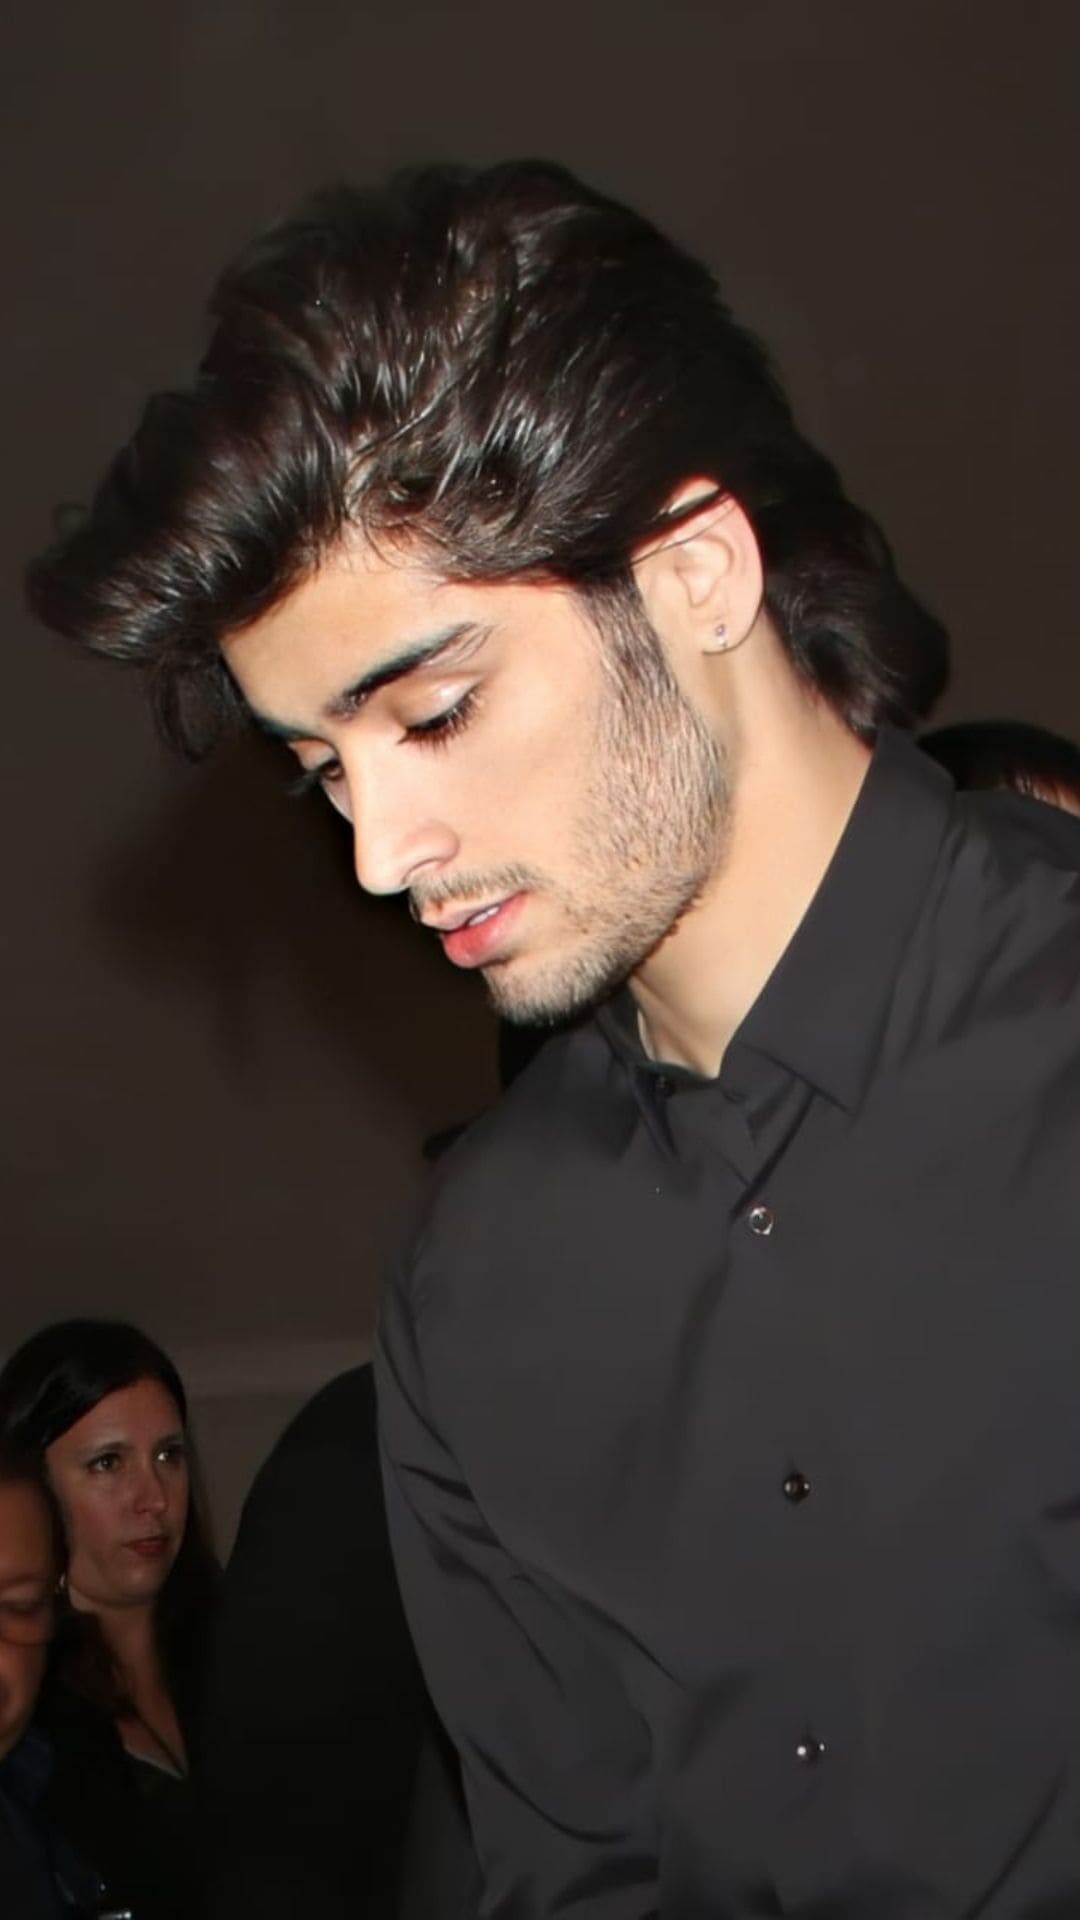 Zayn Malik: The first British male artist to debut at number one in both the UK and US. 1080x1920 Full HD Wallpaper.